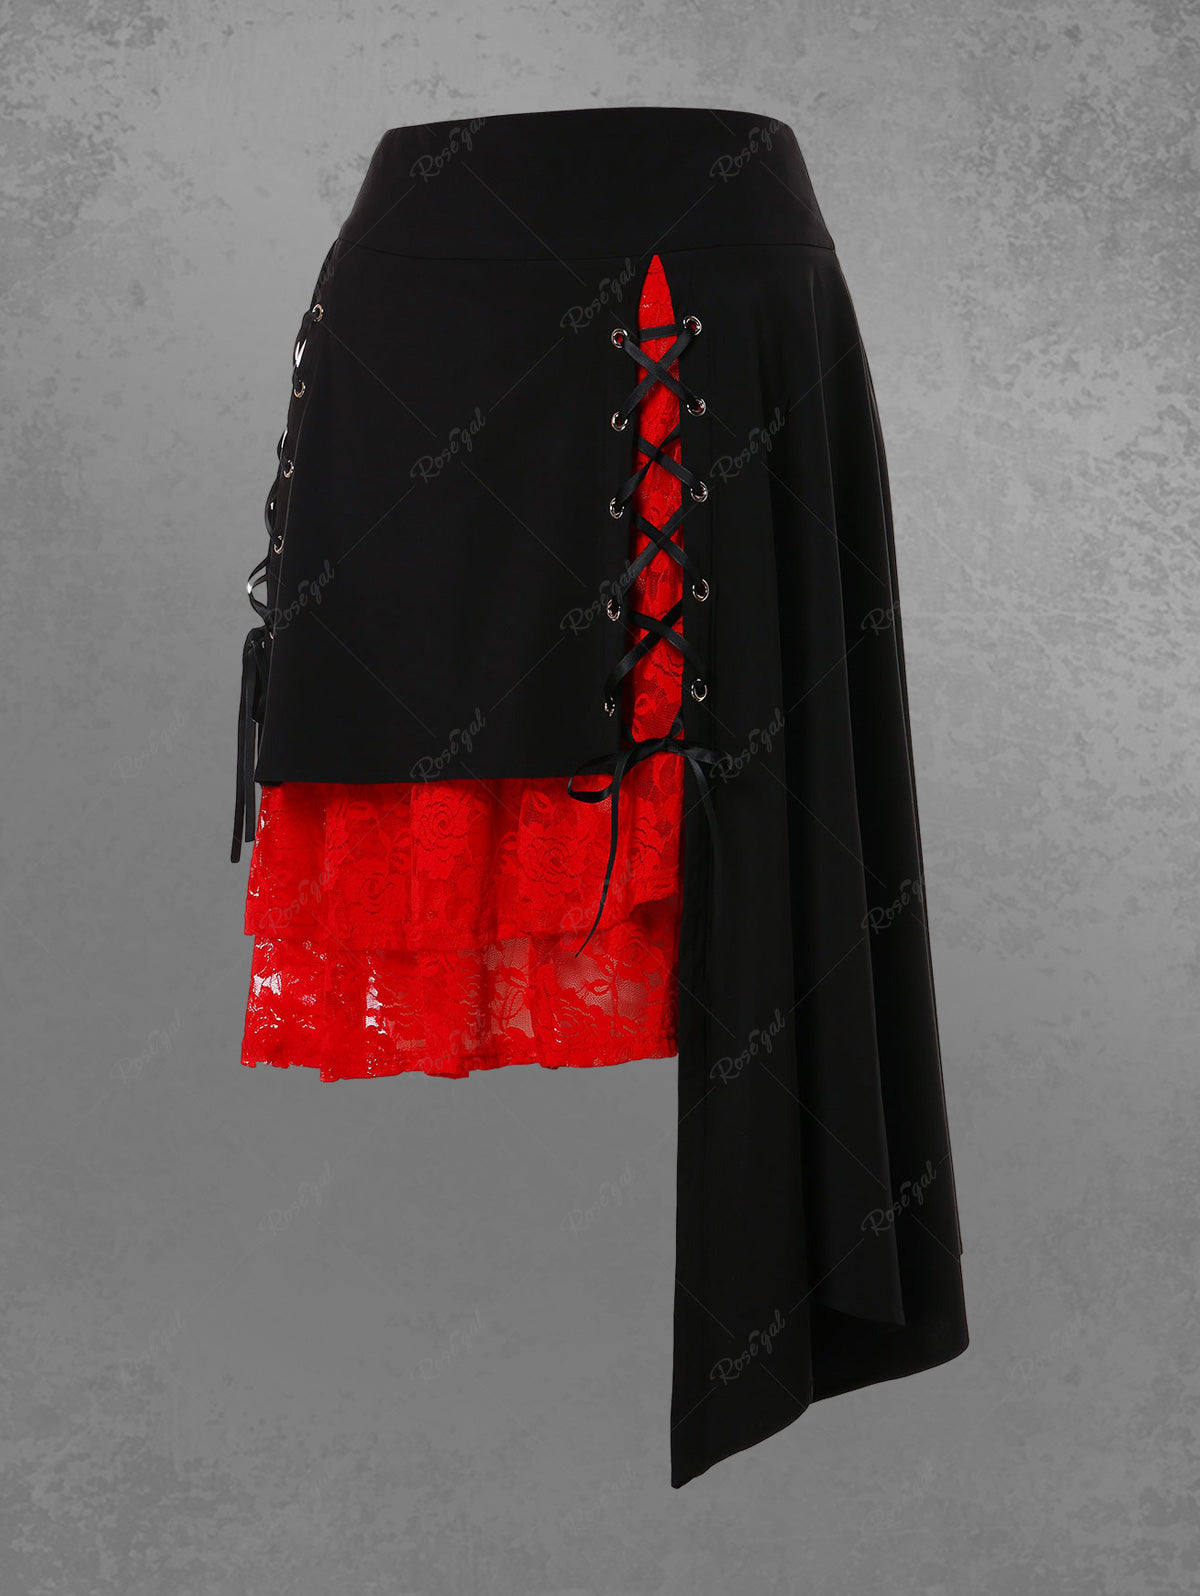 Gothic Floral Lace Asymmetrical Skirt